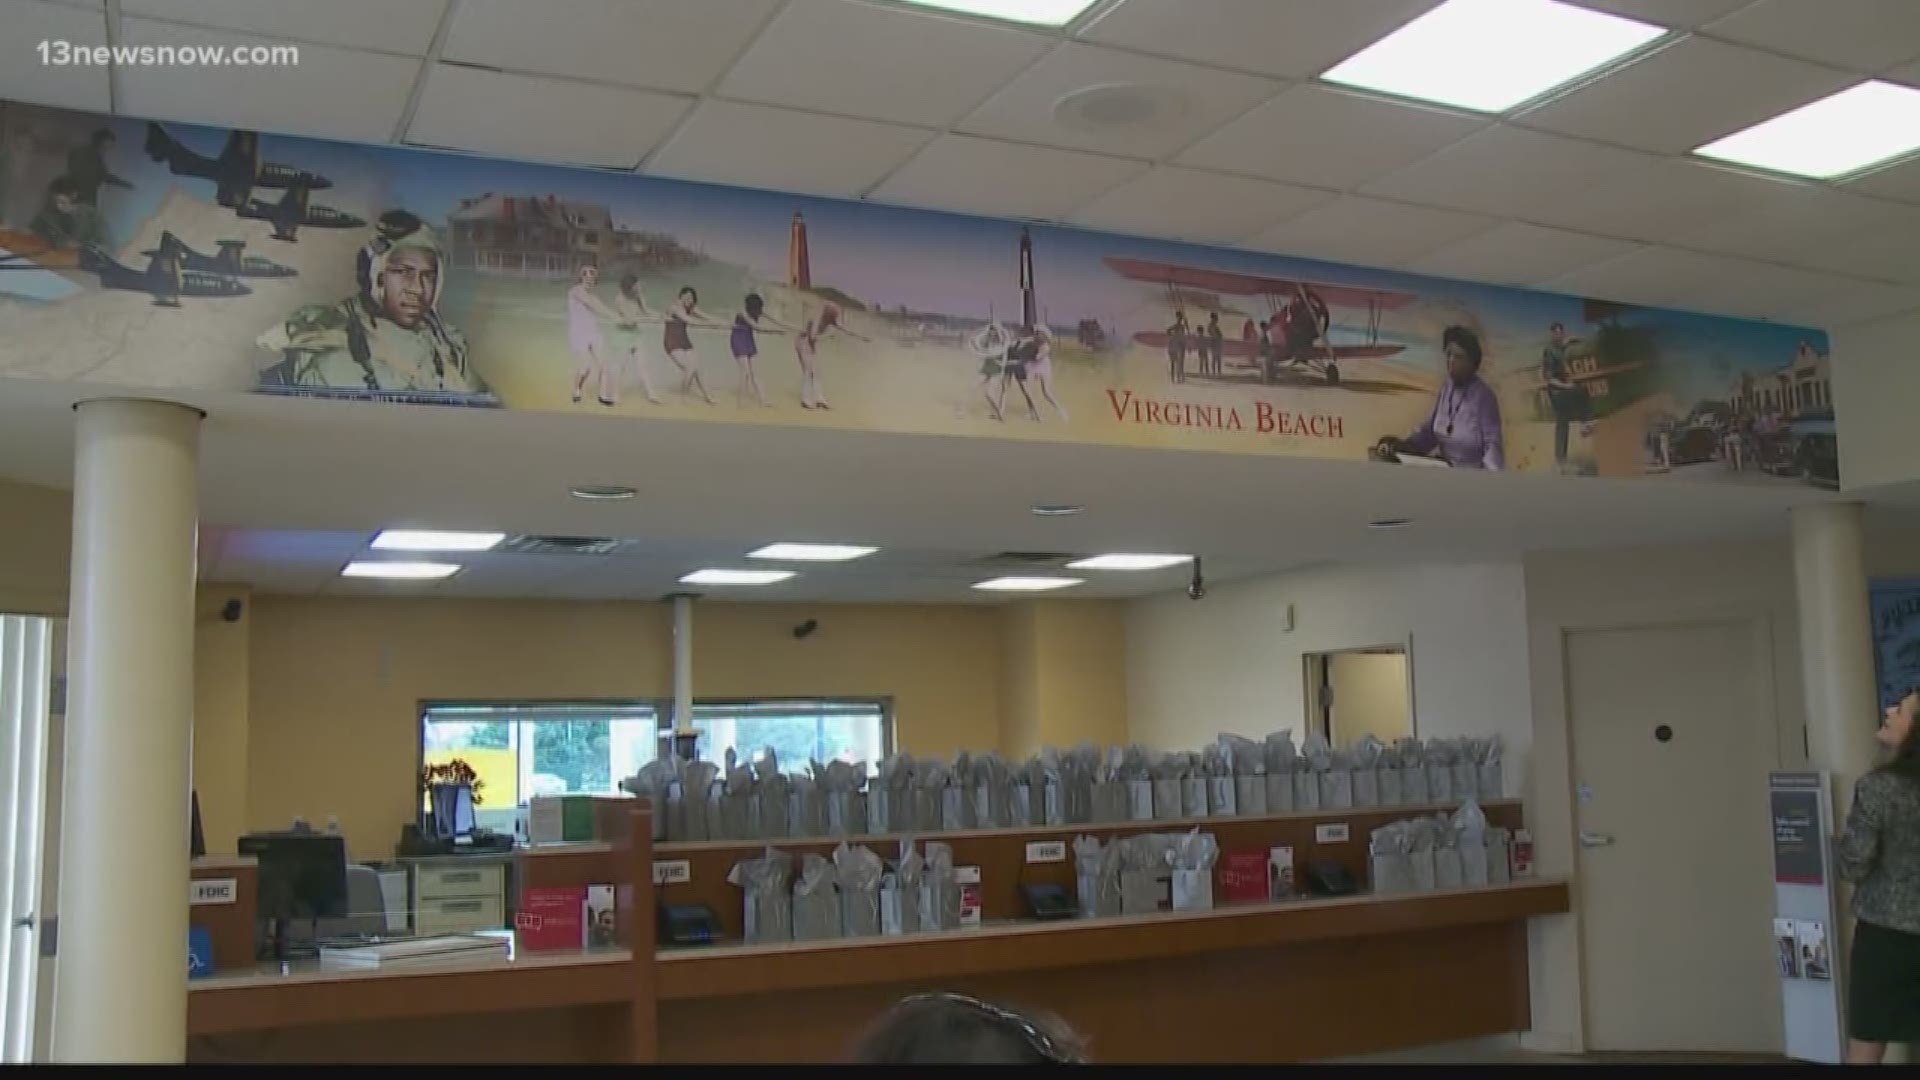 Two murals were unveiled at Wells Fargo Banks in Virginia Beach.